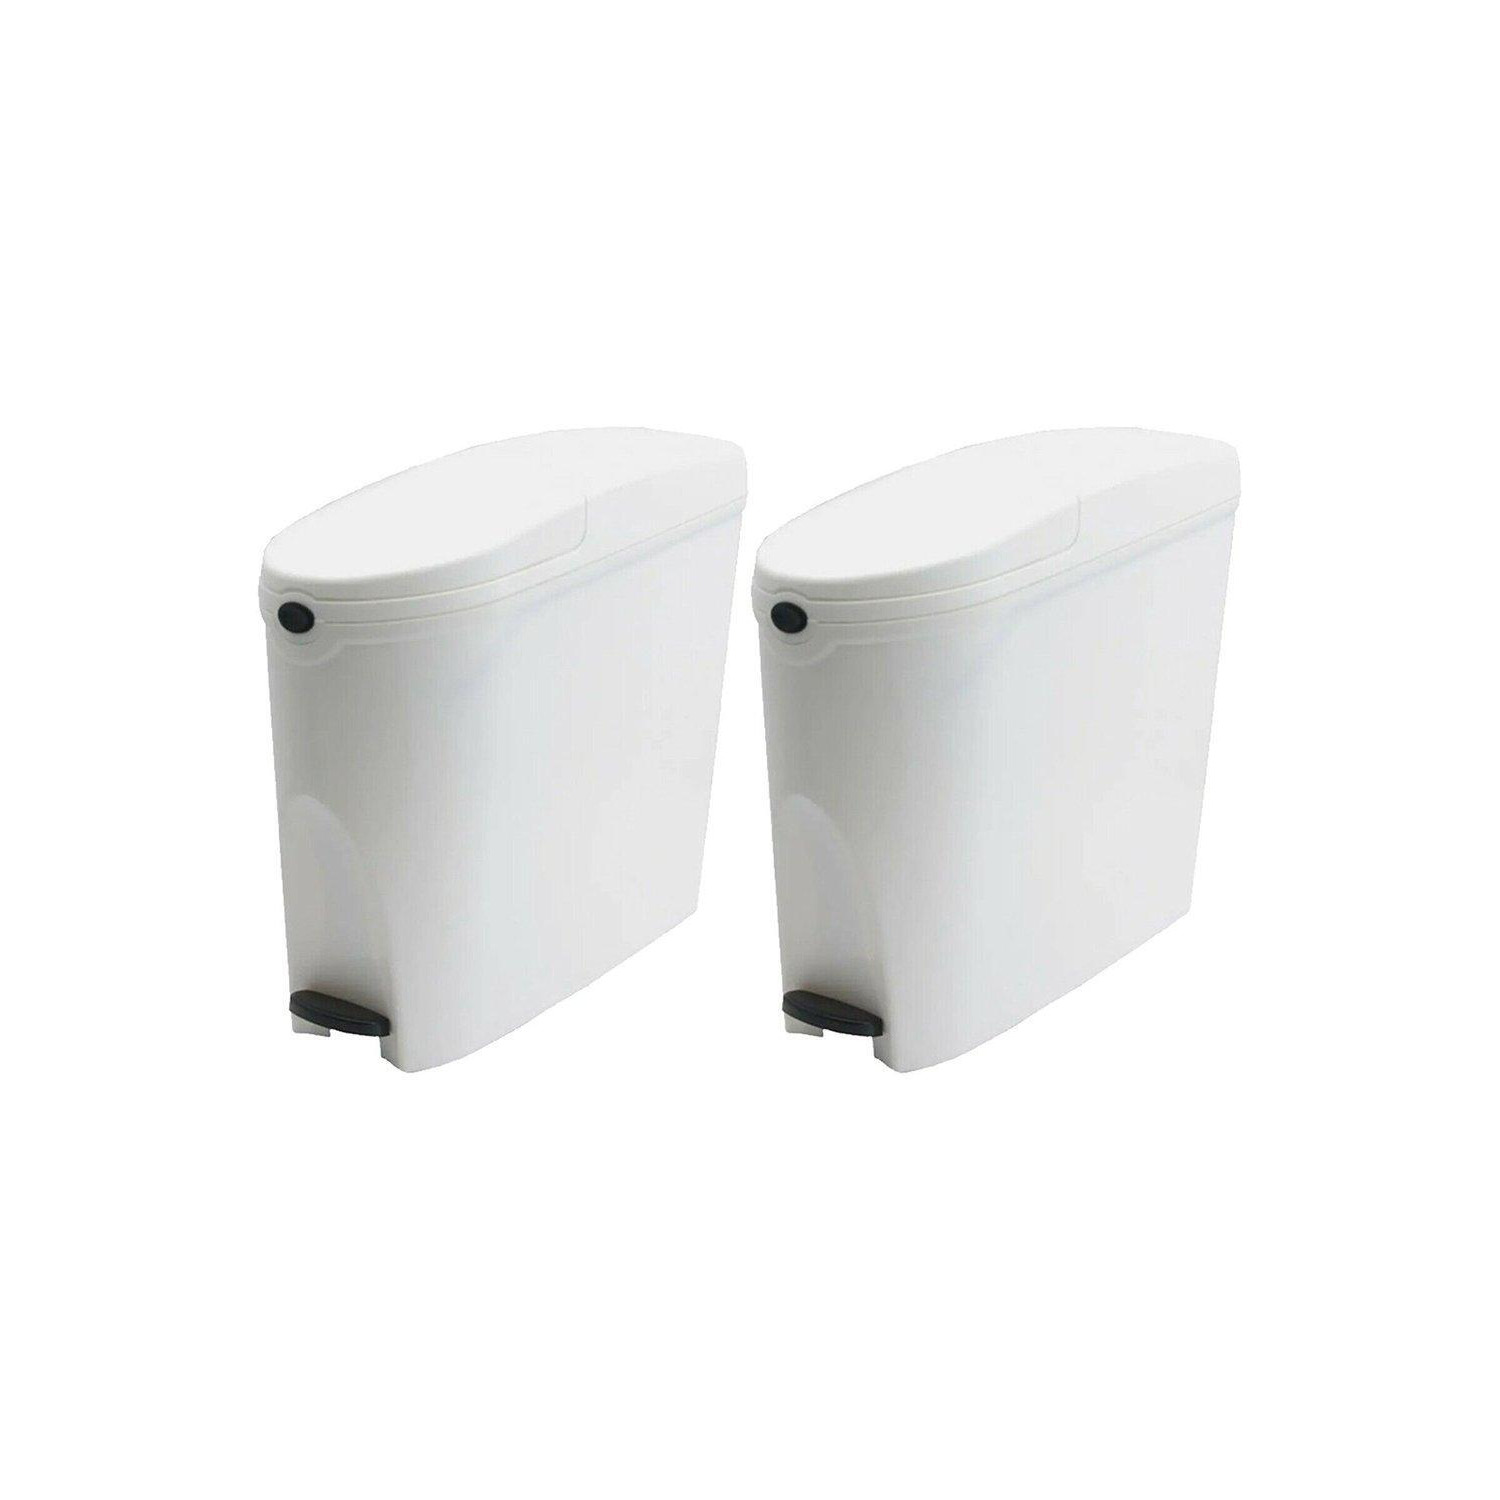 White  Pedal Operated Toilet Sanitary Bin 2 x 20 Litre Capacity - image 1